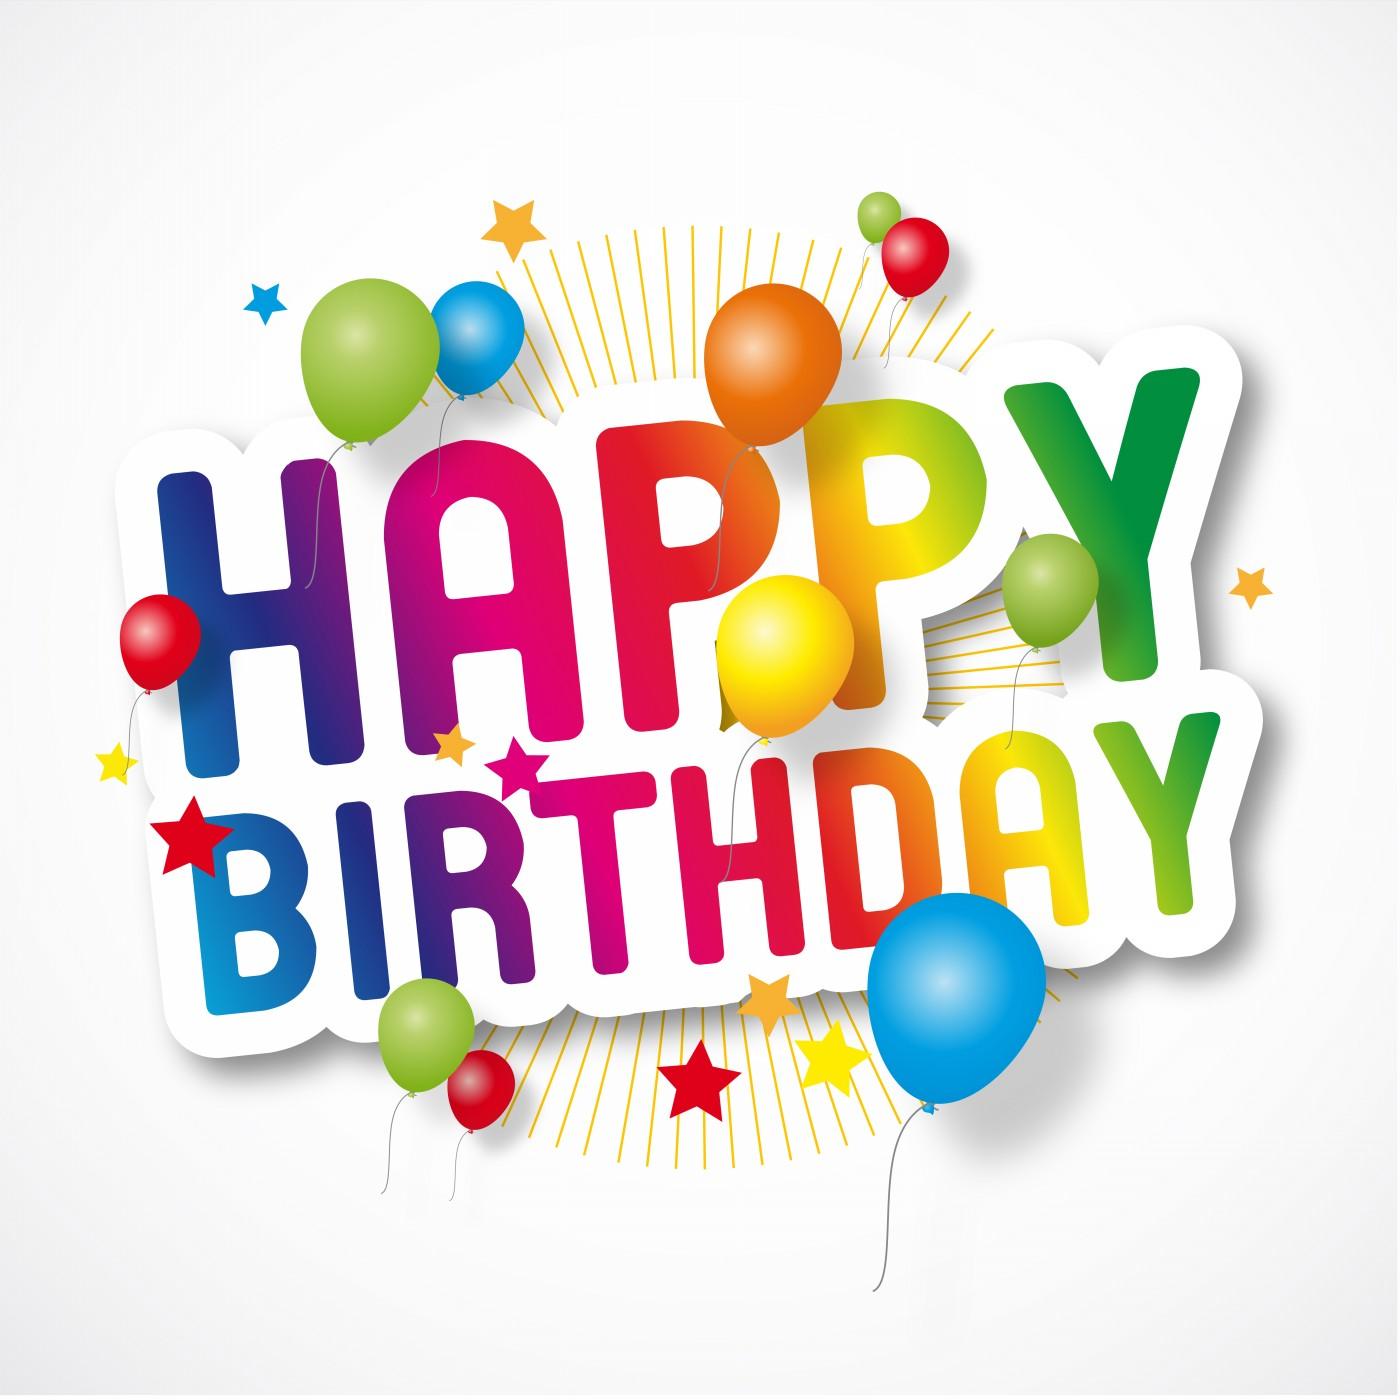 Free Happy Birthday Png, Download Free Clip Art, Free Clip Art on.